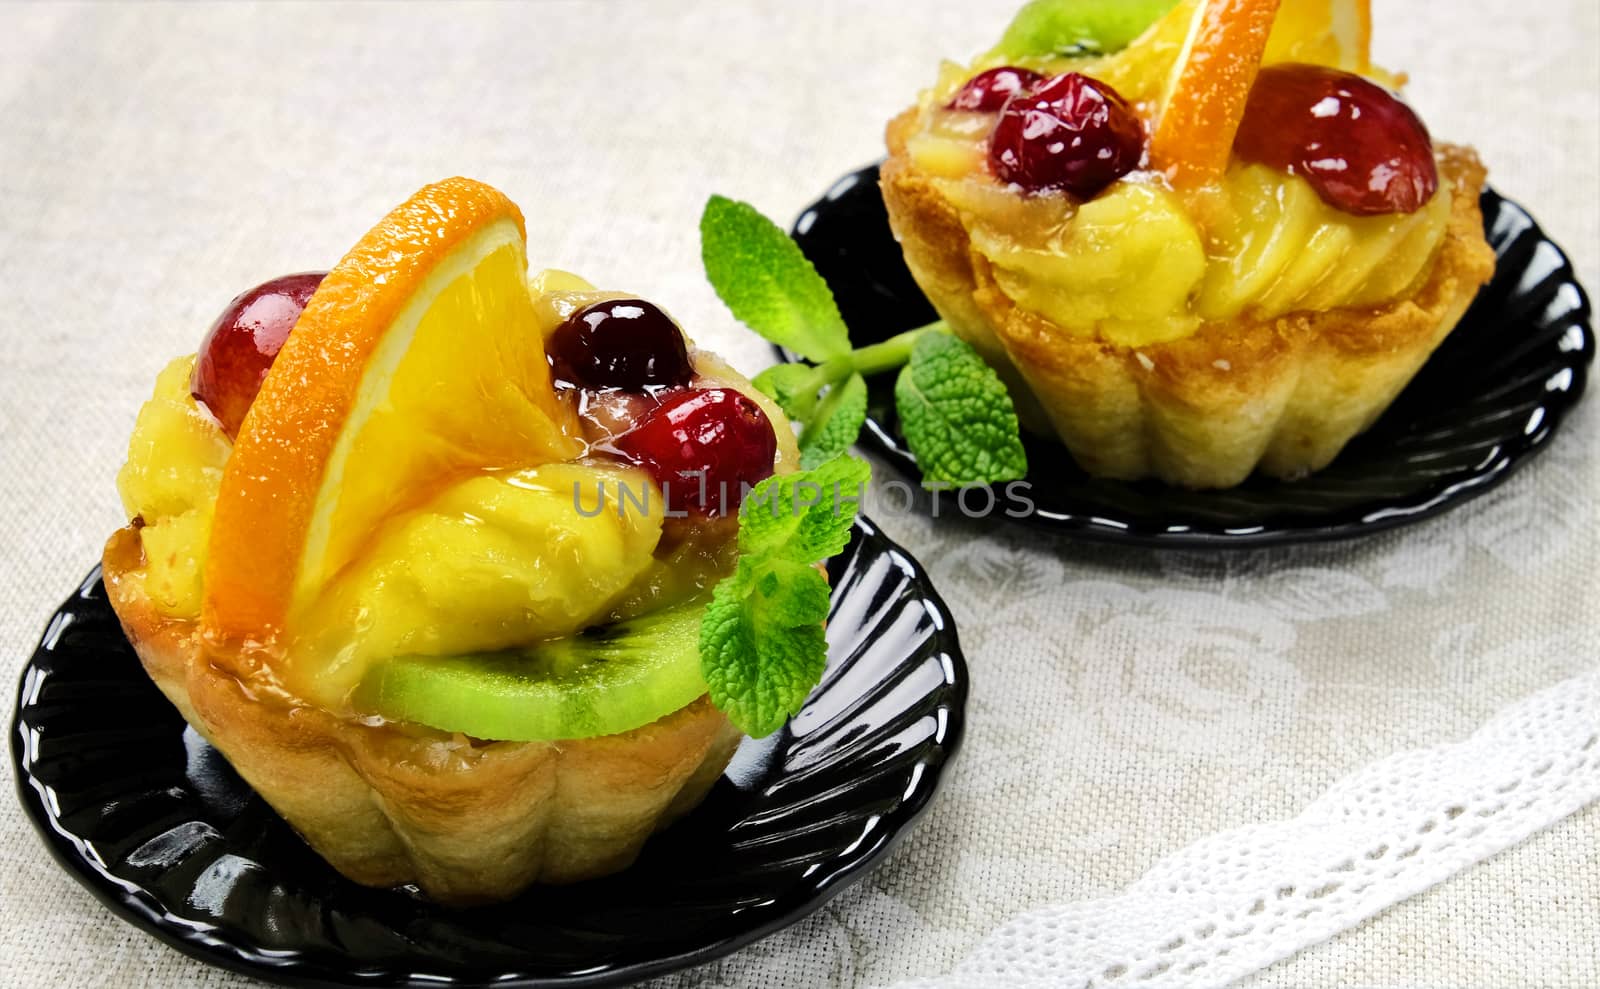 Cakes with slices of fresh fruit orange, kiwi and grapes with jelly and cream on a black saucers on a table cloth.